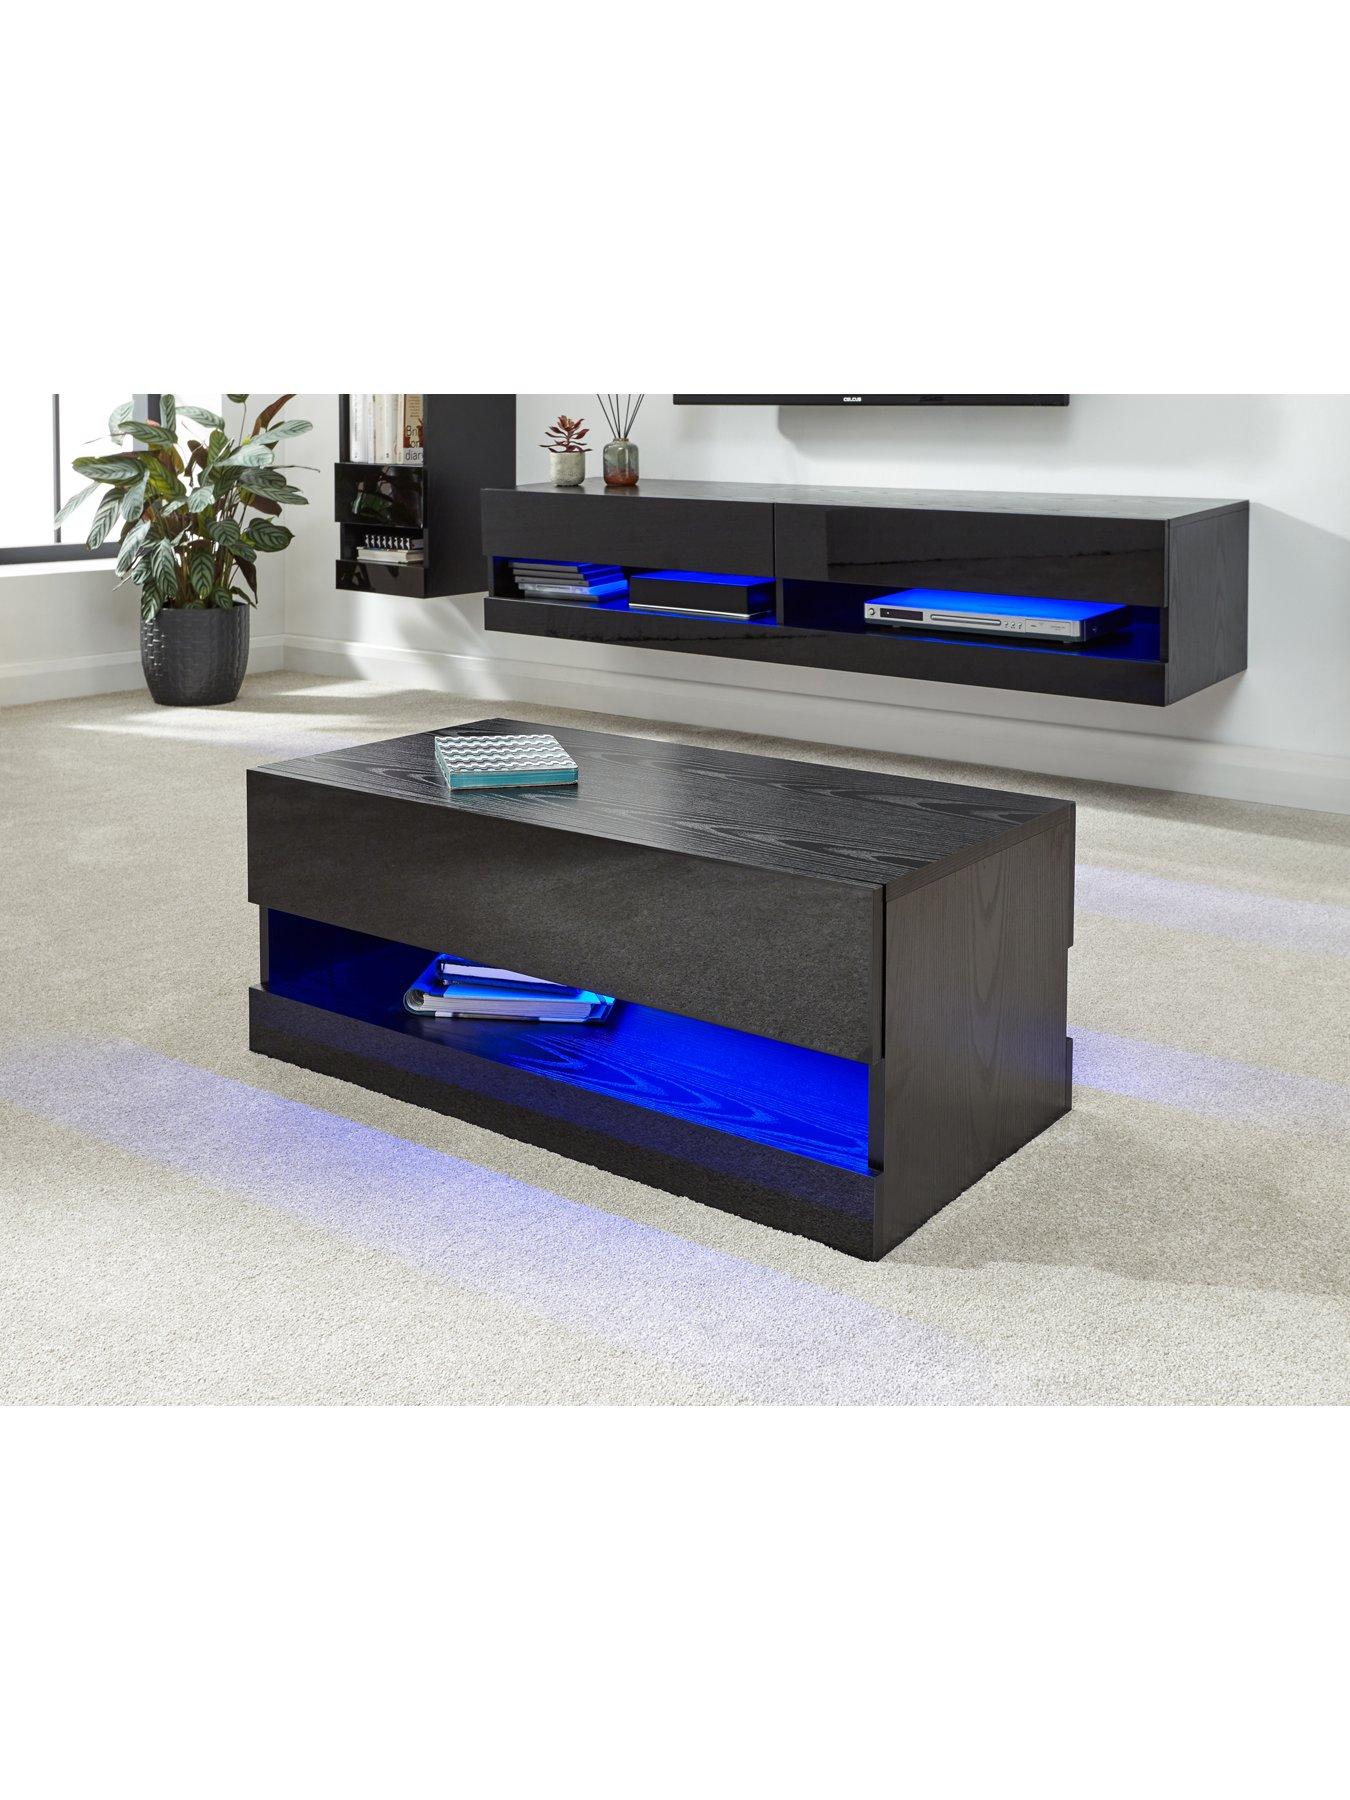 Gfw Galicia Compact Coffee Table With Led Light - Black